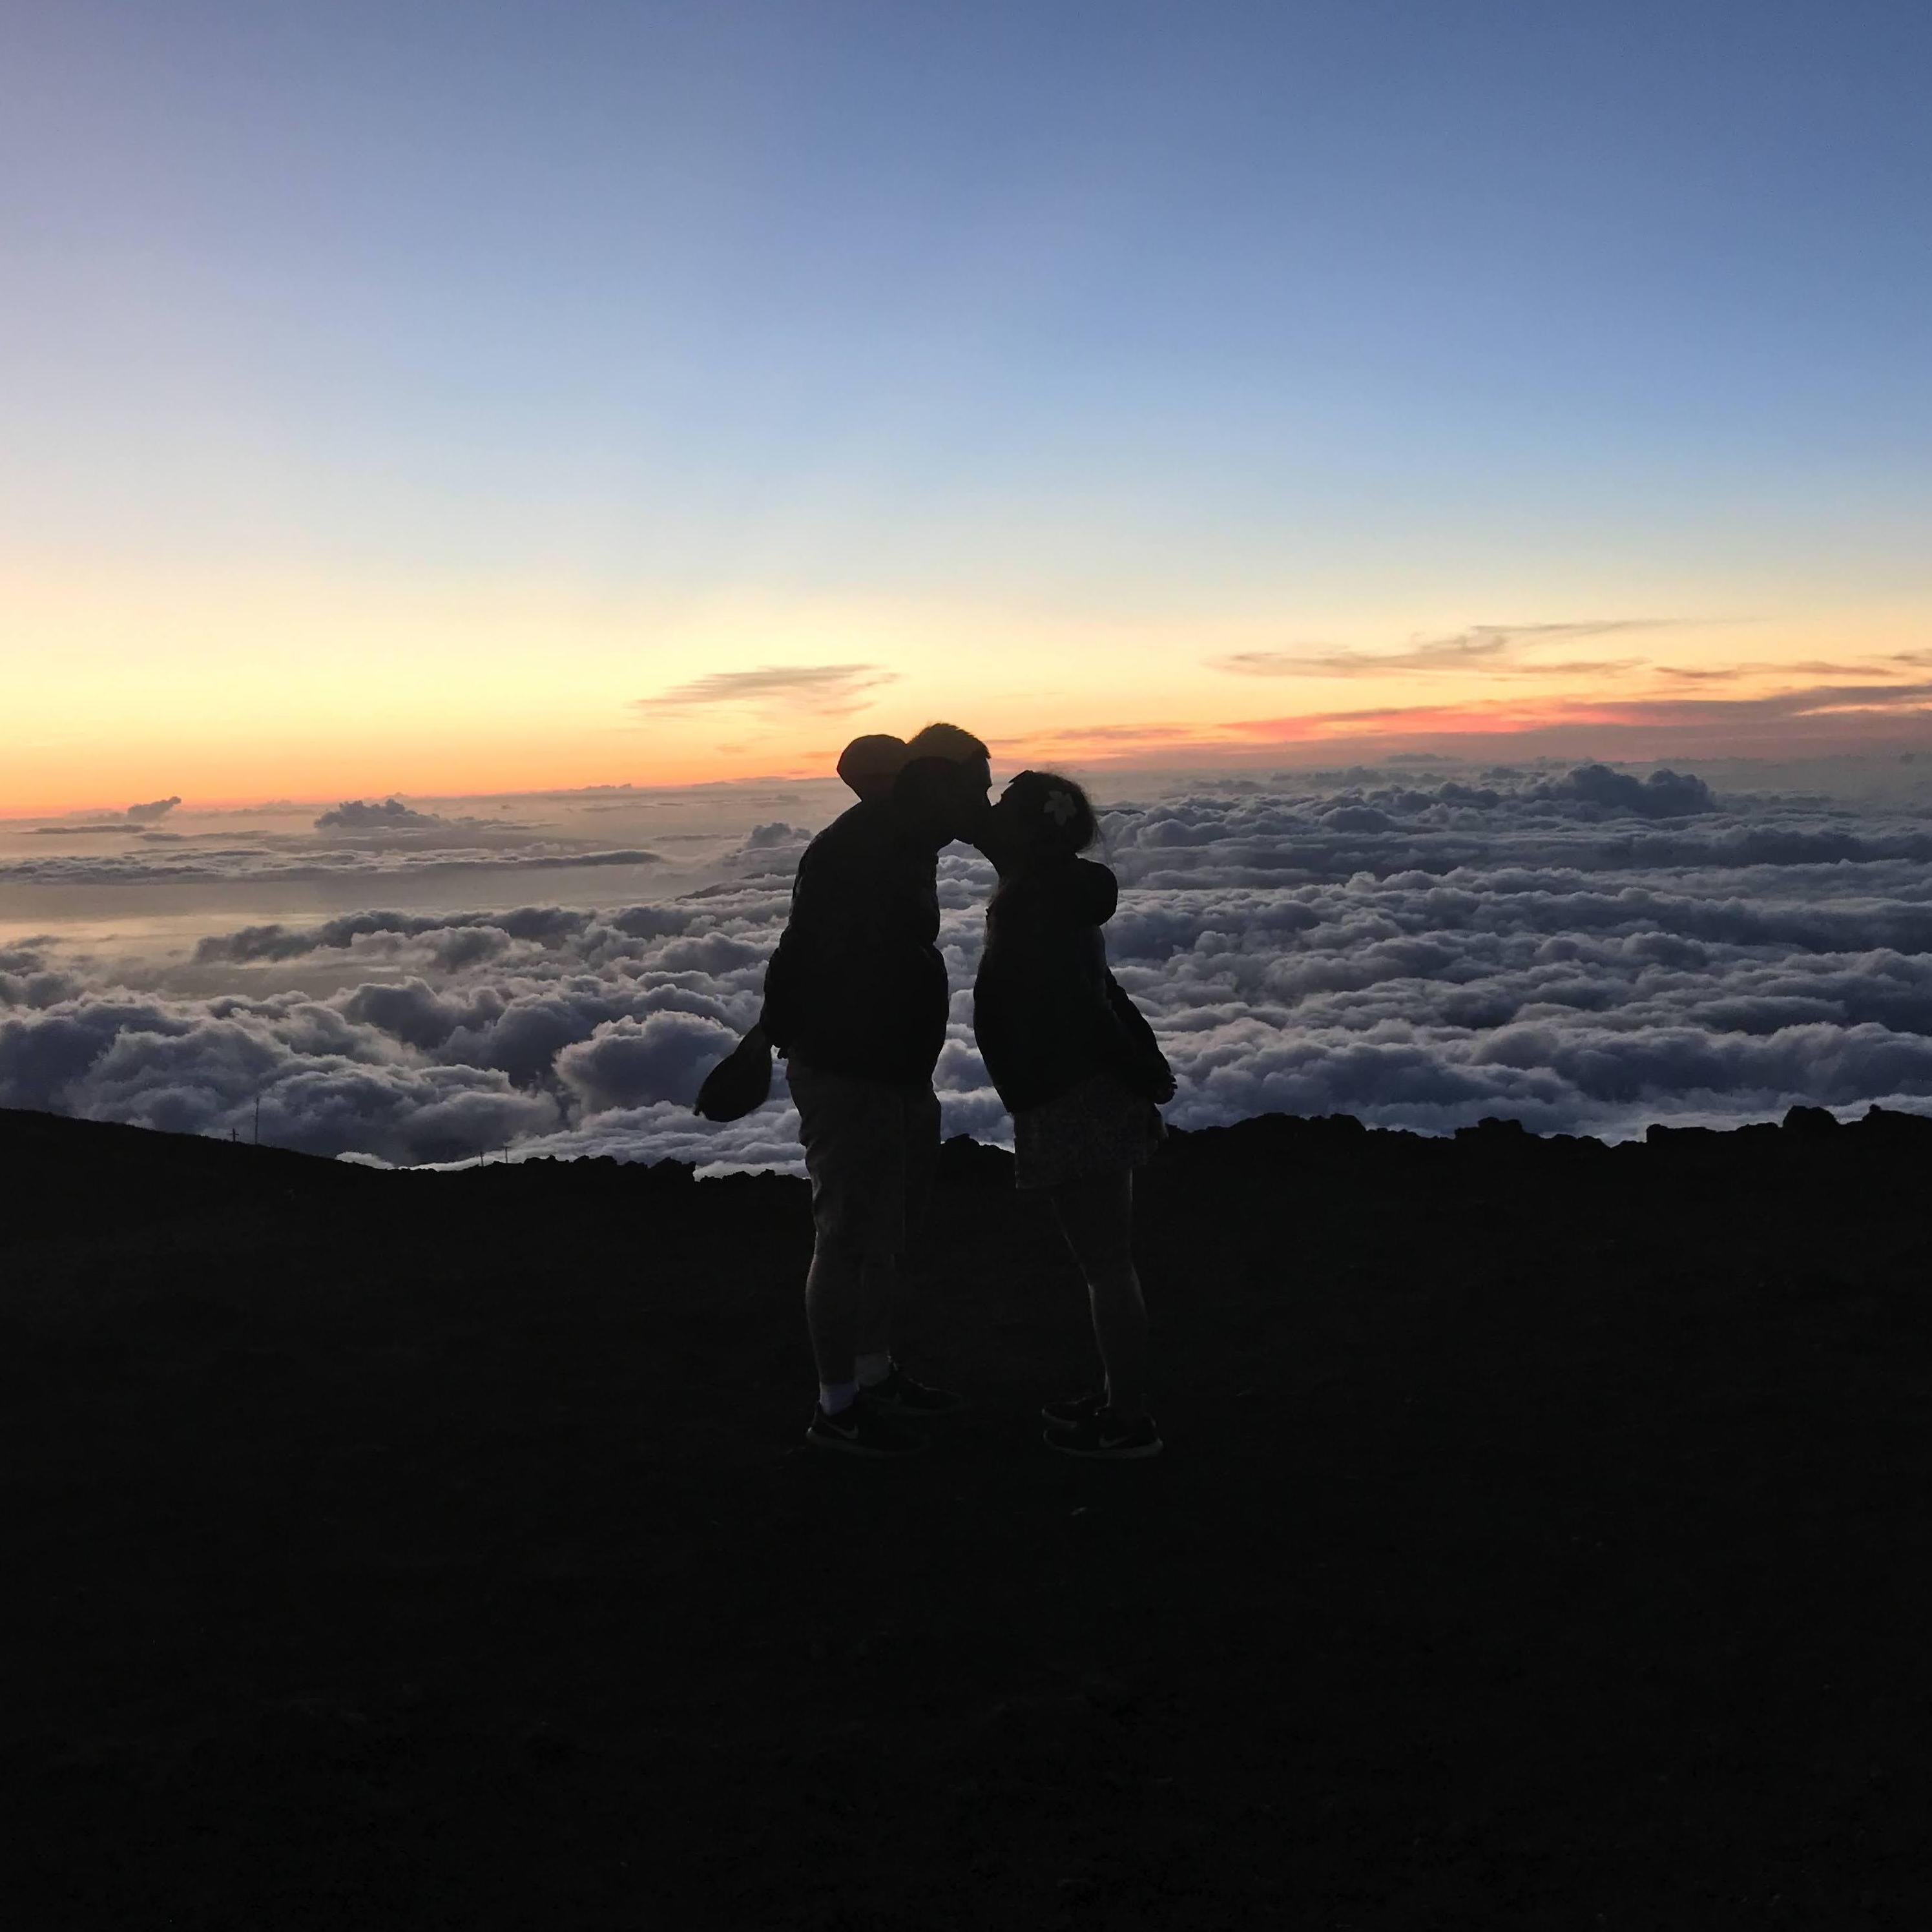 Watching the sunset above the clouds at Mt. Haleakalā in Maui, HI.